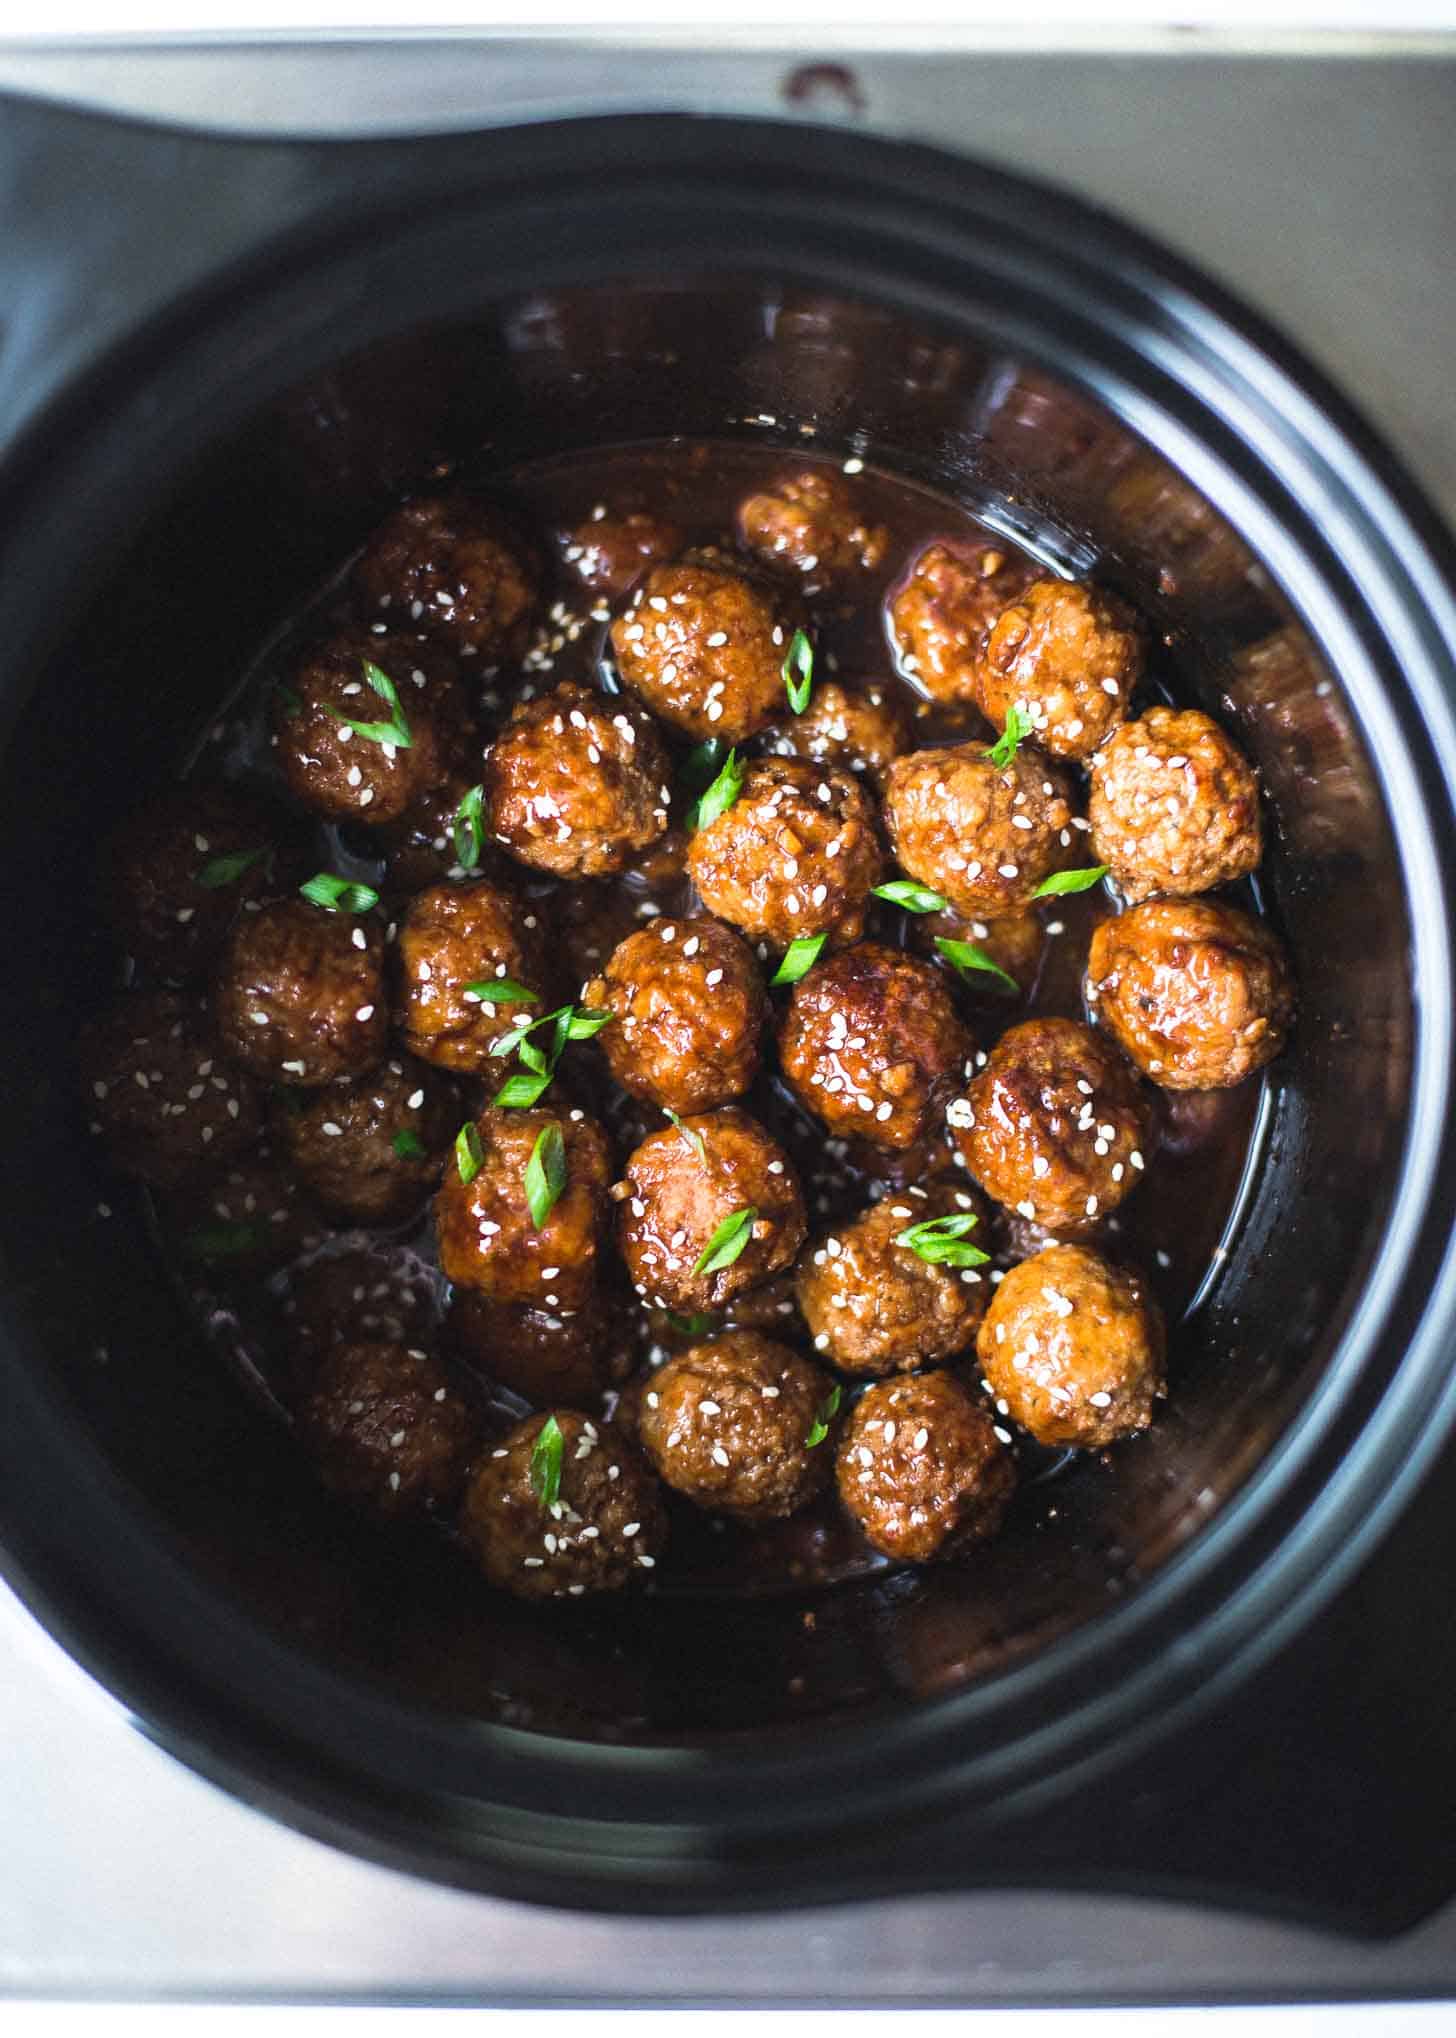 Meatballs in a slow cooker